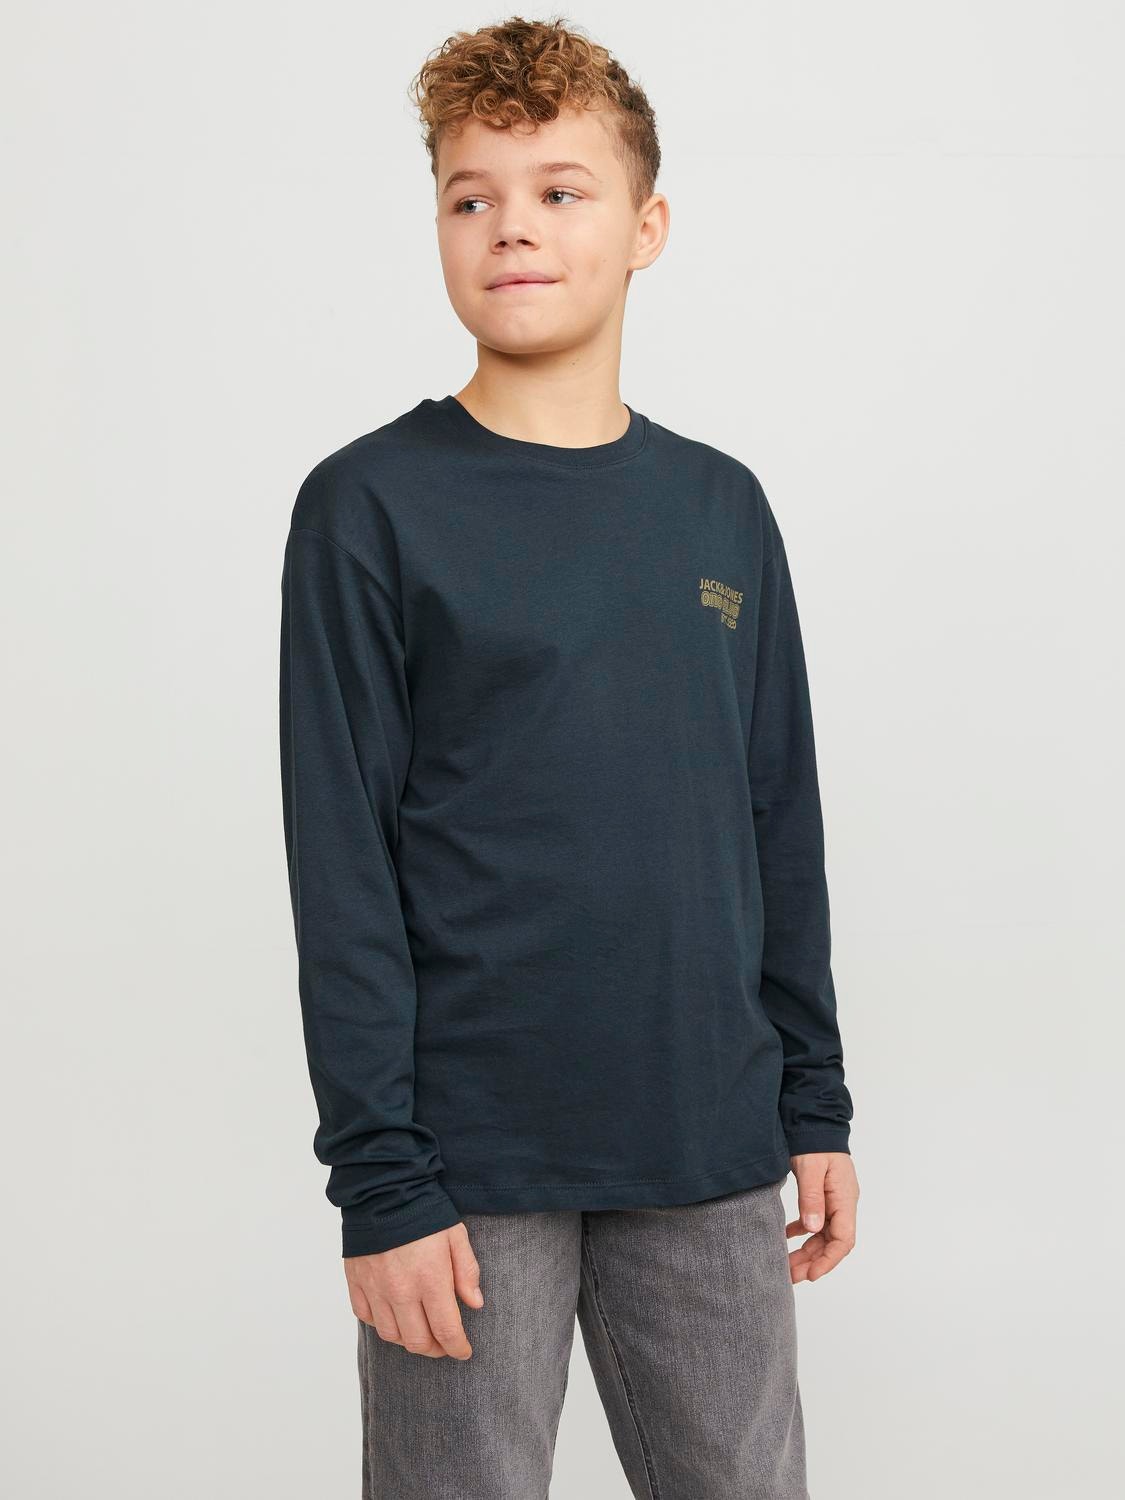 Jack & Jones T-shirt Stampato Per Bambino -Magical Forest - 12262091